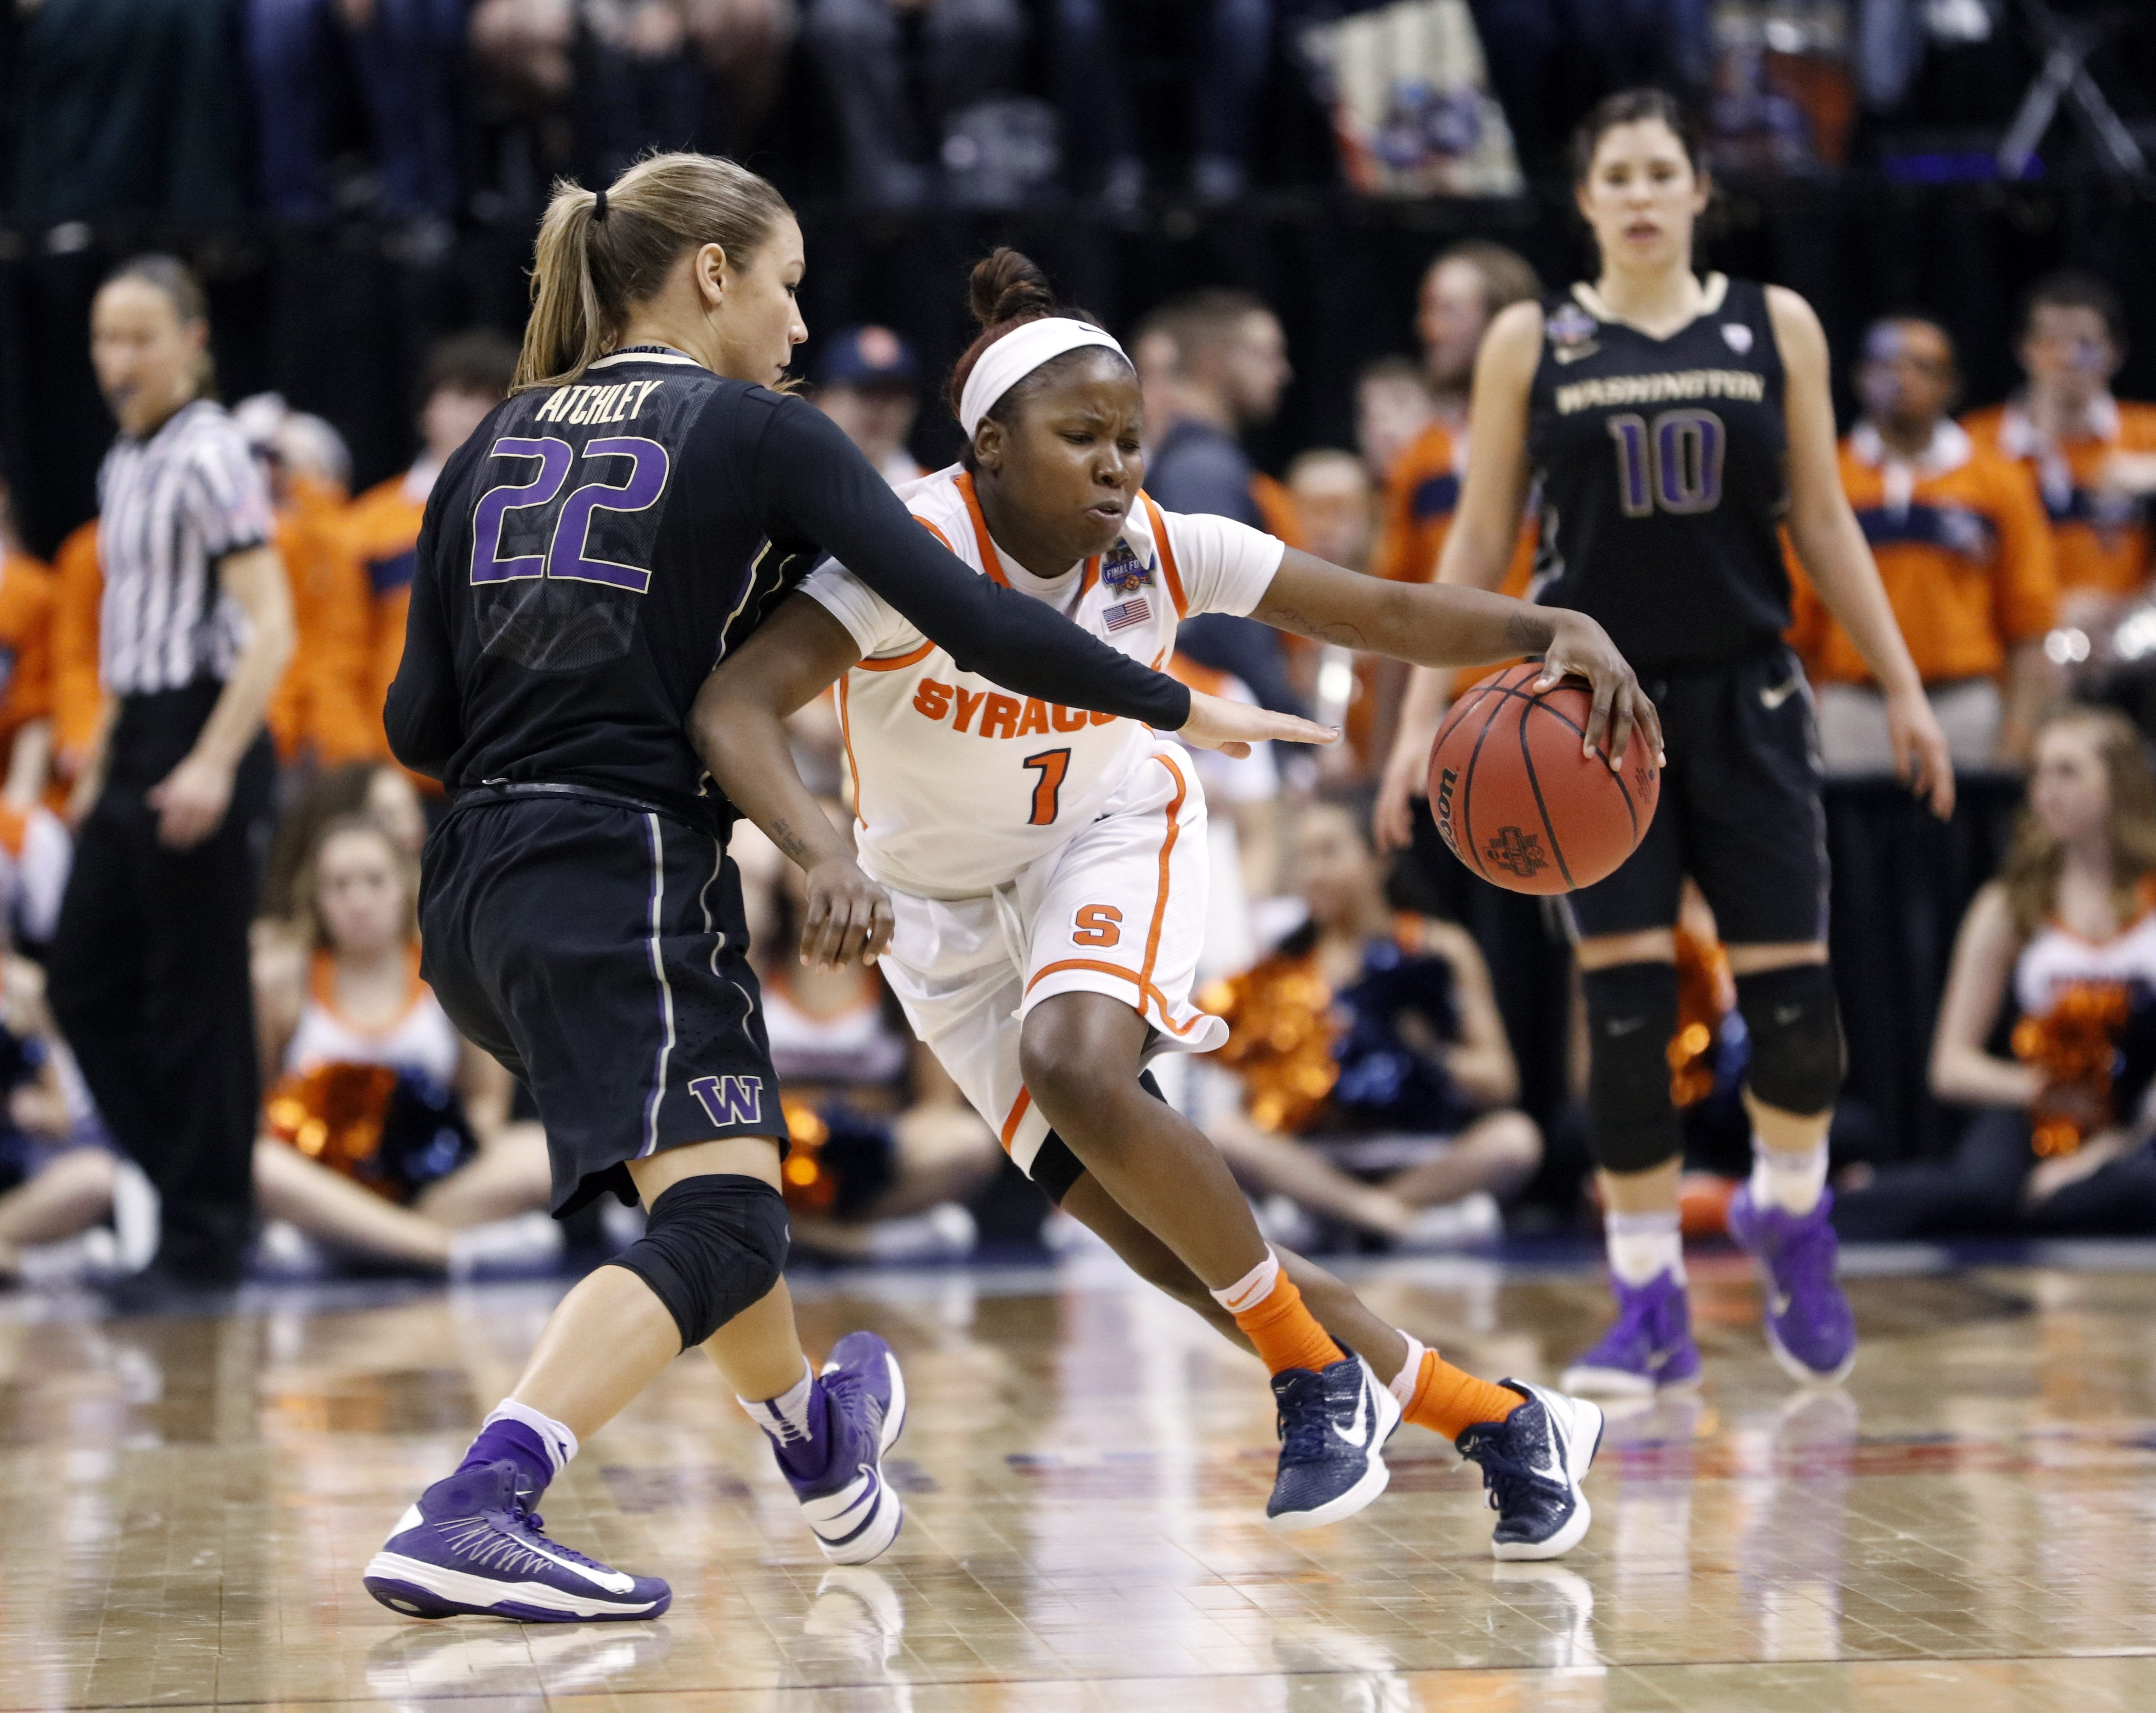 Syracuse's Alexis Peterson (1) is defended by Washington's Alexus Atchley (22) during the second half of a national semifinal game at the women's Final Four in the NCAA college basketball tournament Sunday, April 3, 2016, in Indianapolis. Syracuse won 80-59.